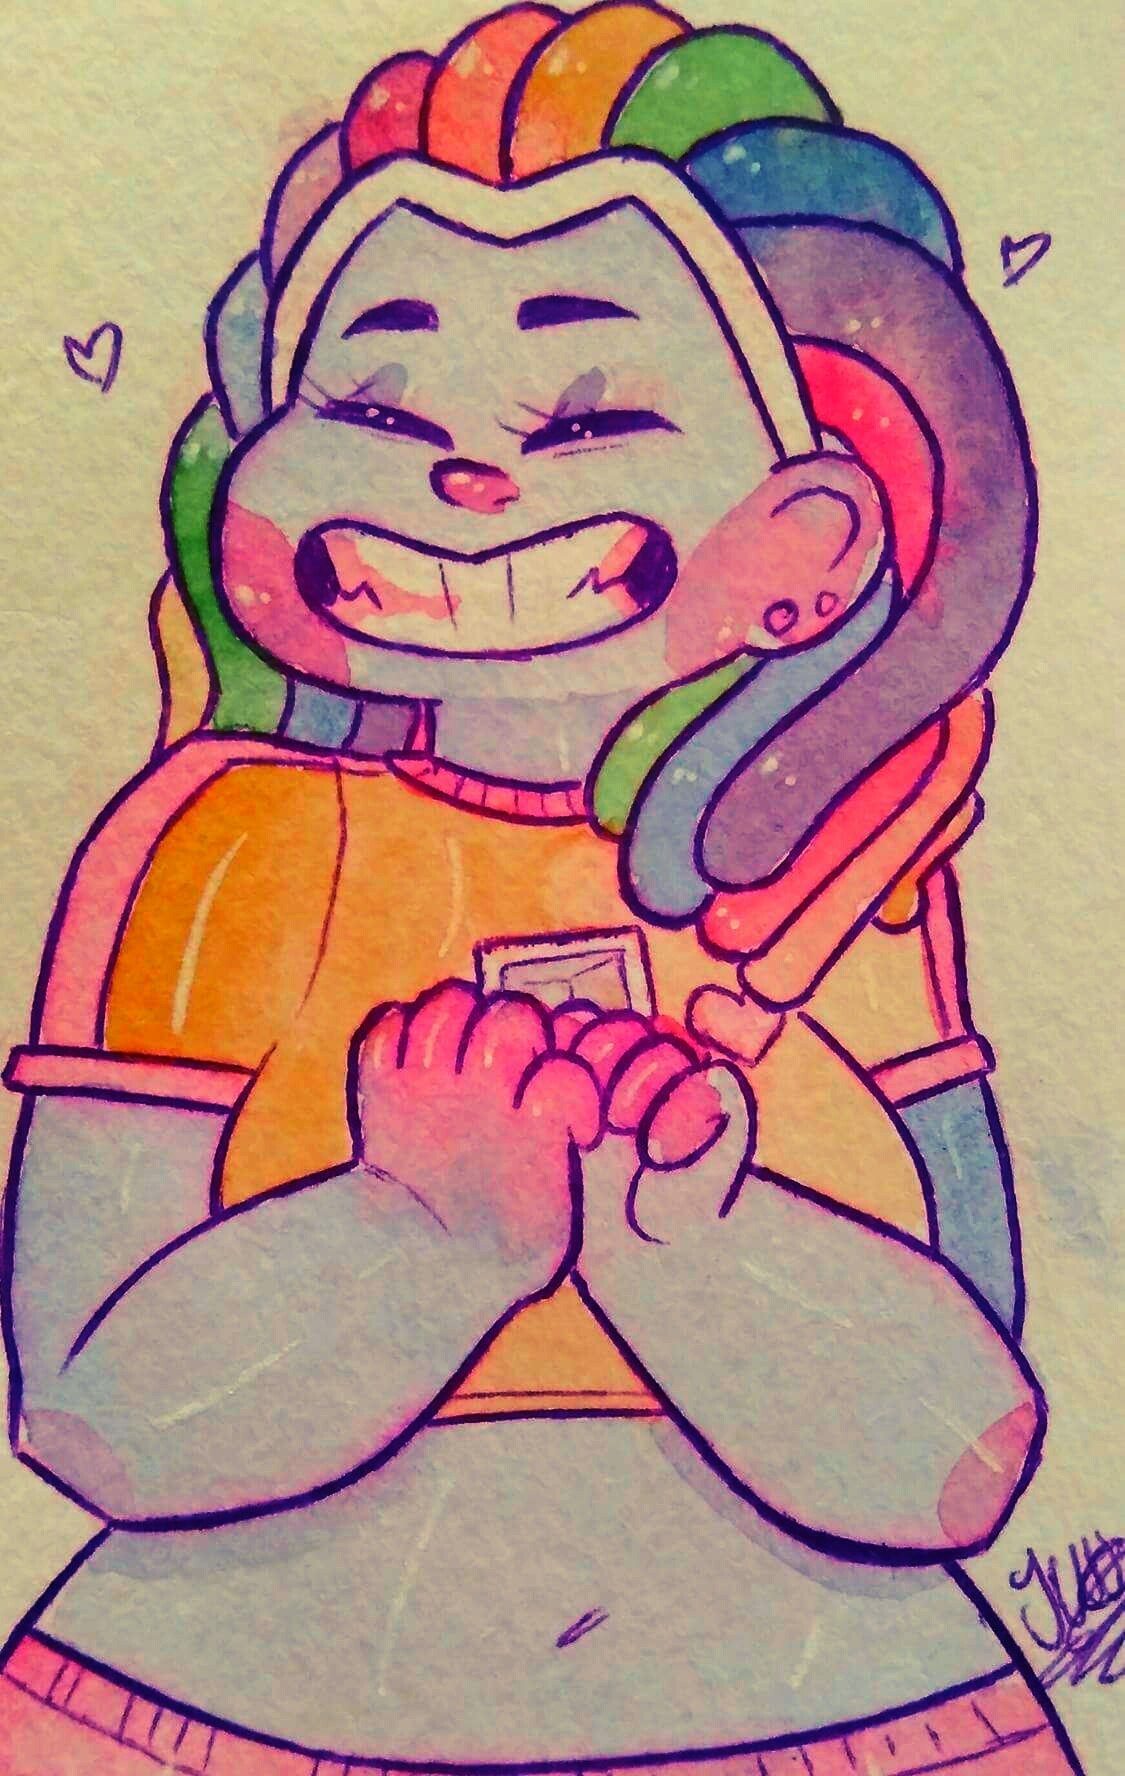 Here’s a cheerful Bismuth.